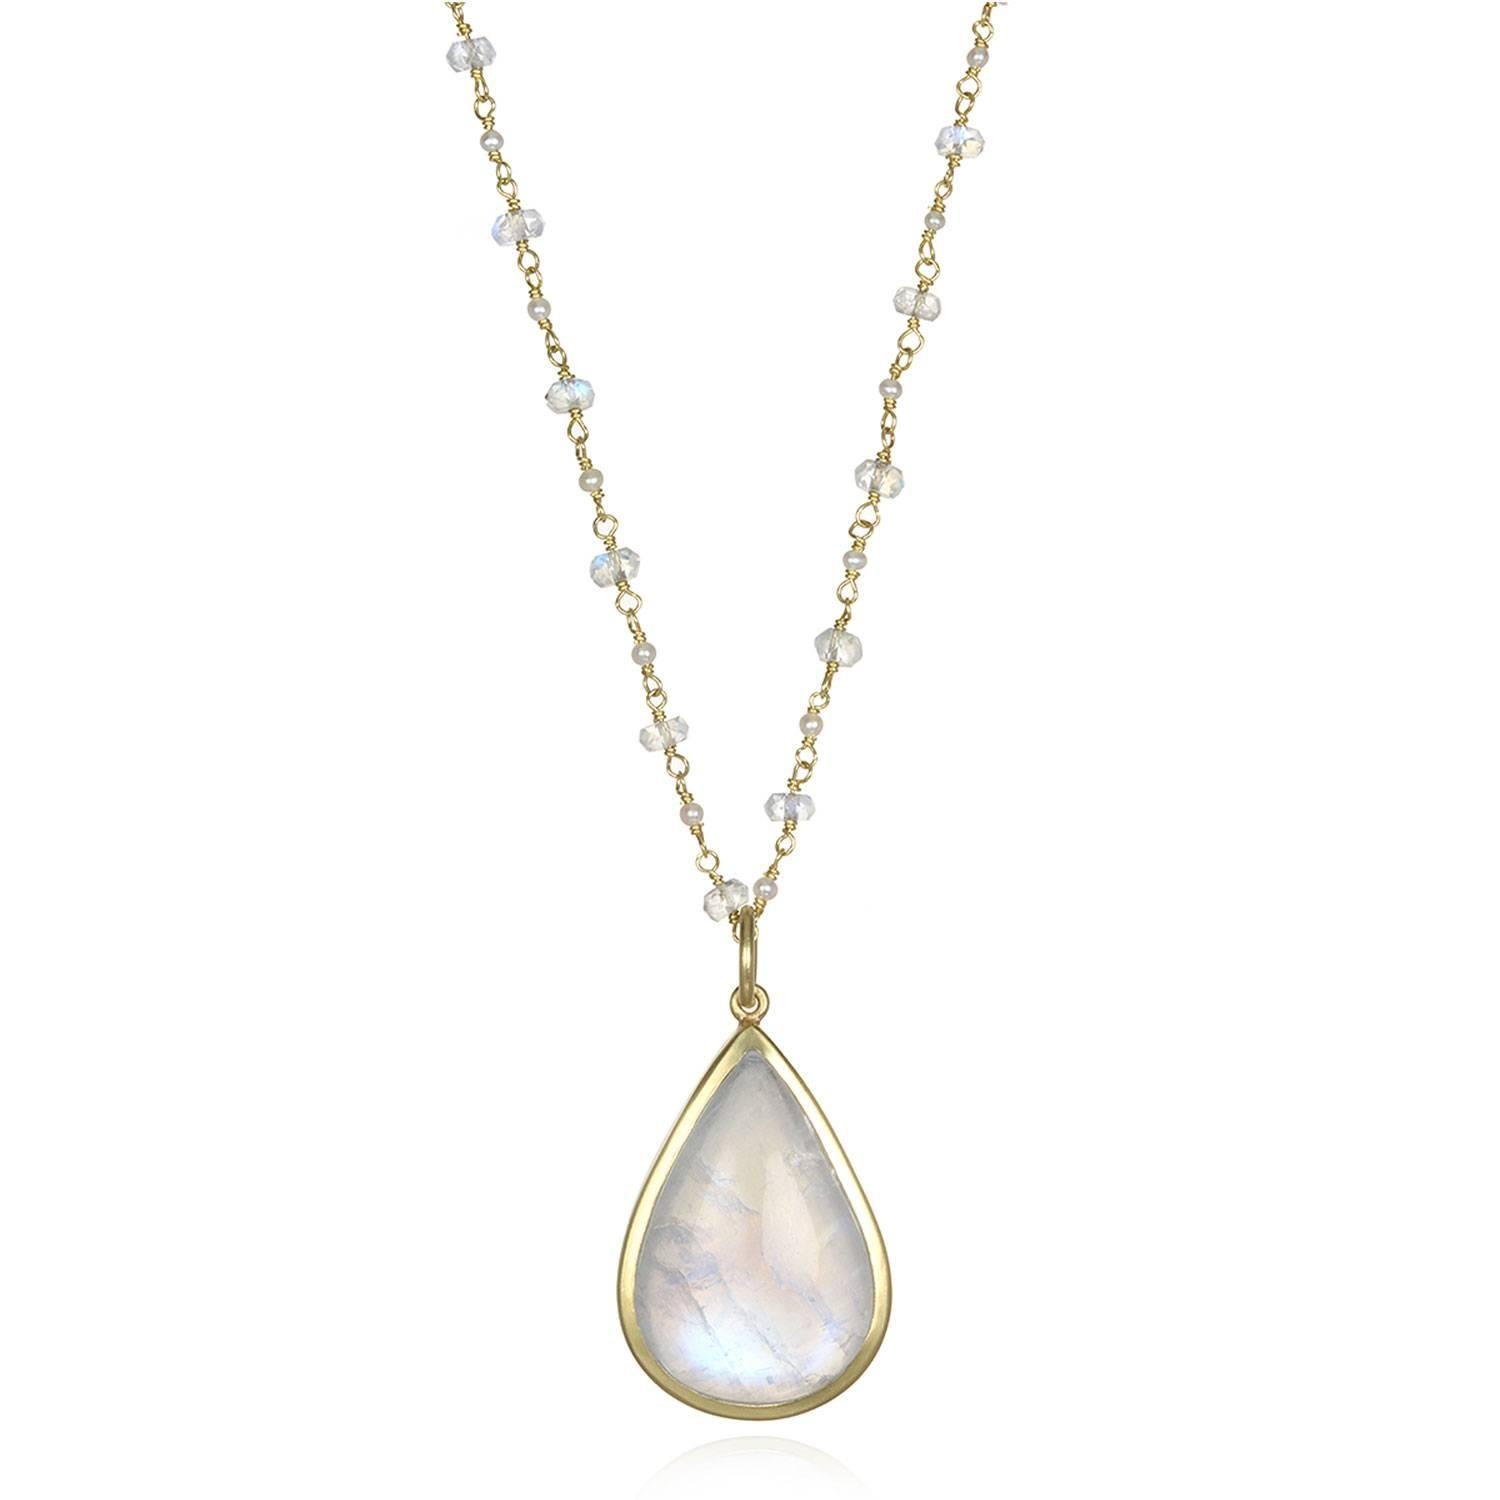 This 36 carat moonstone's iridescent aura will draw you in like a crystal ball.   The moonstone is hand framed in a clean bezel 18K gold* setting showcasing the stone's stand-alone beauty. Known for its adularescence, moonstones offer versatility